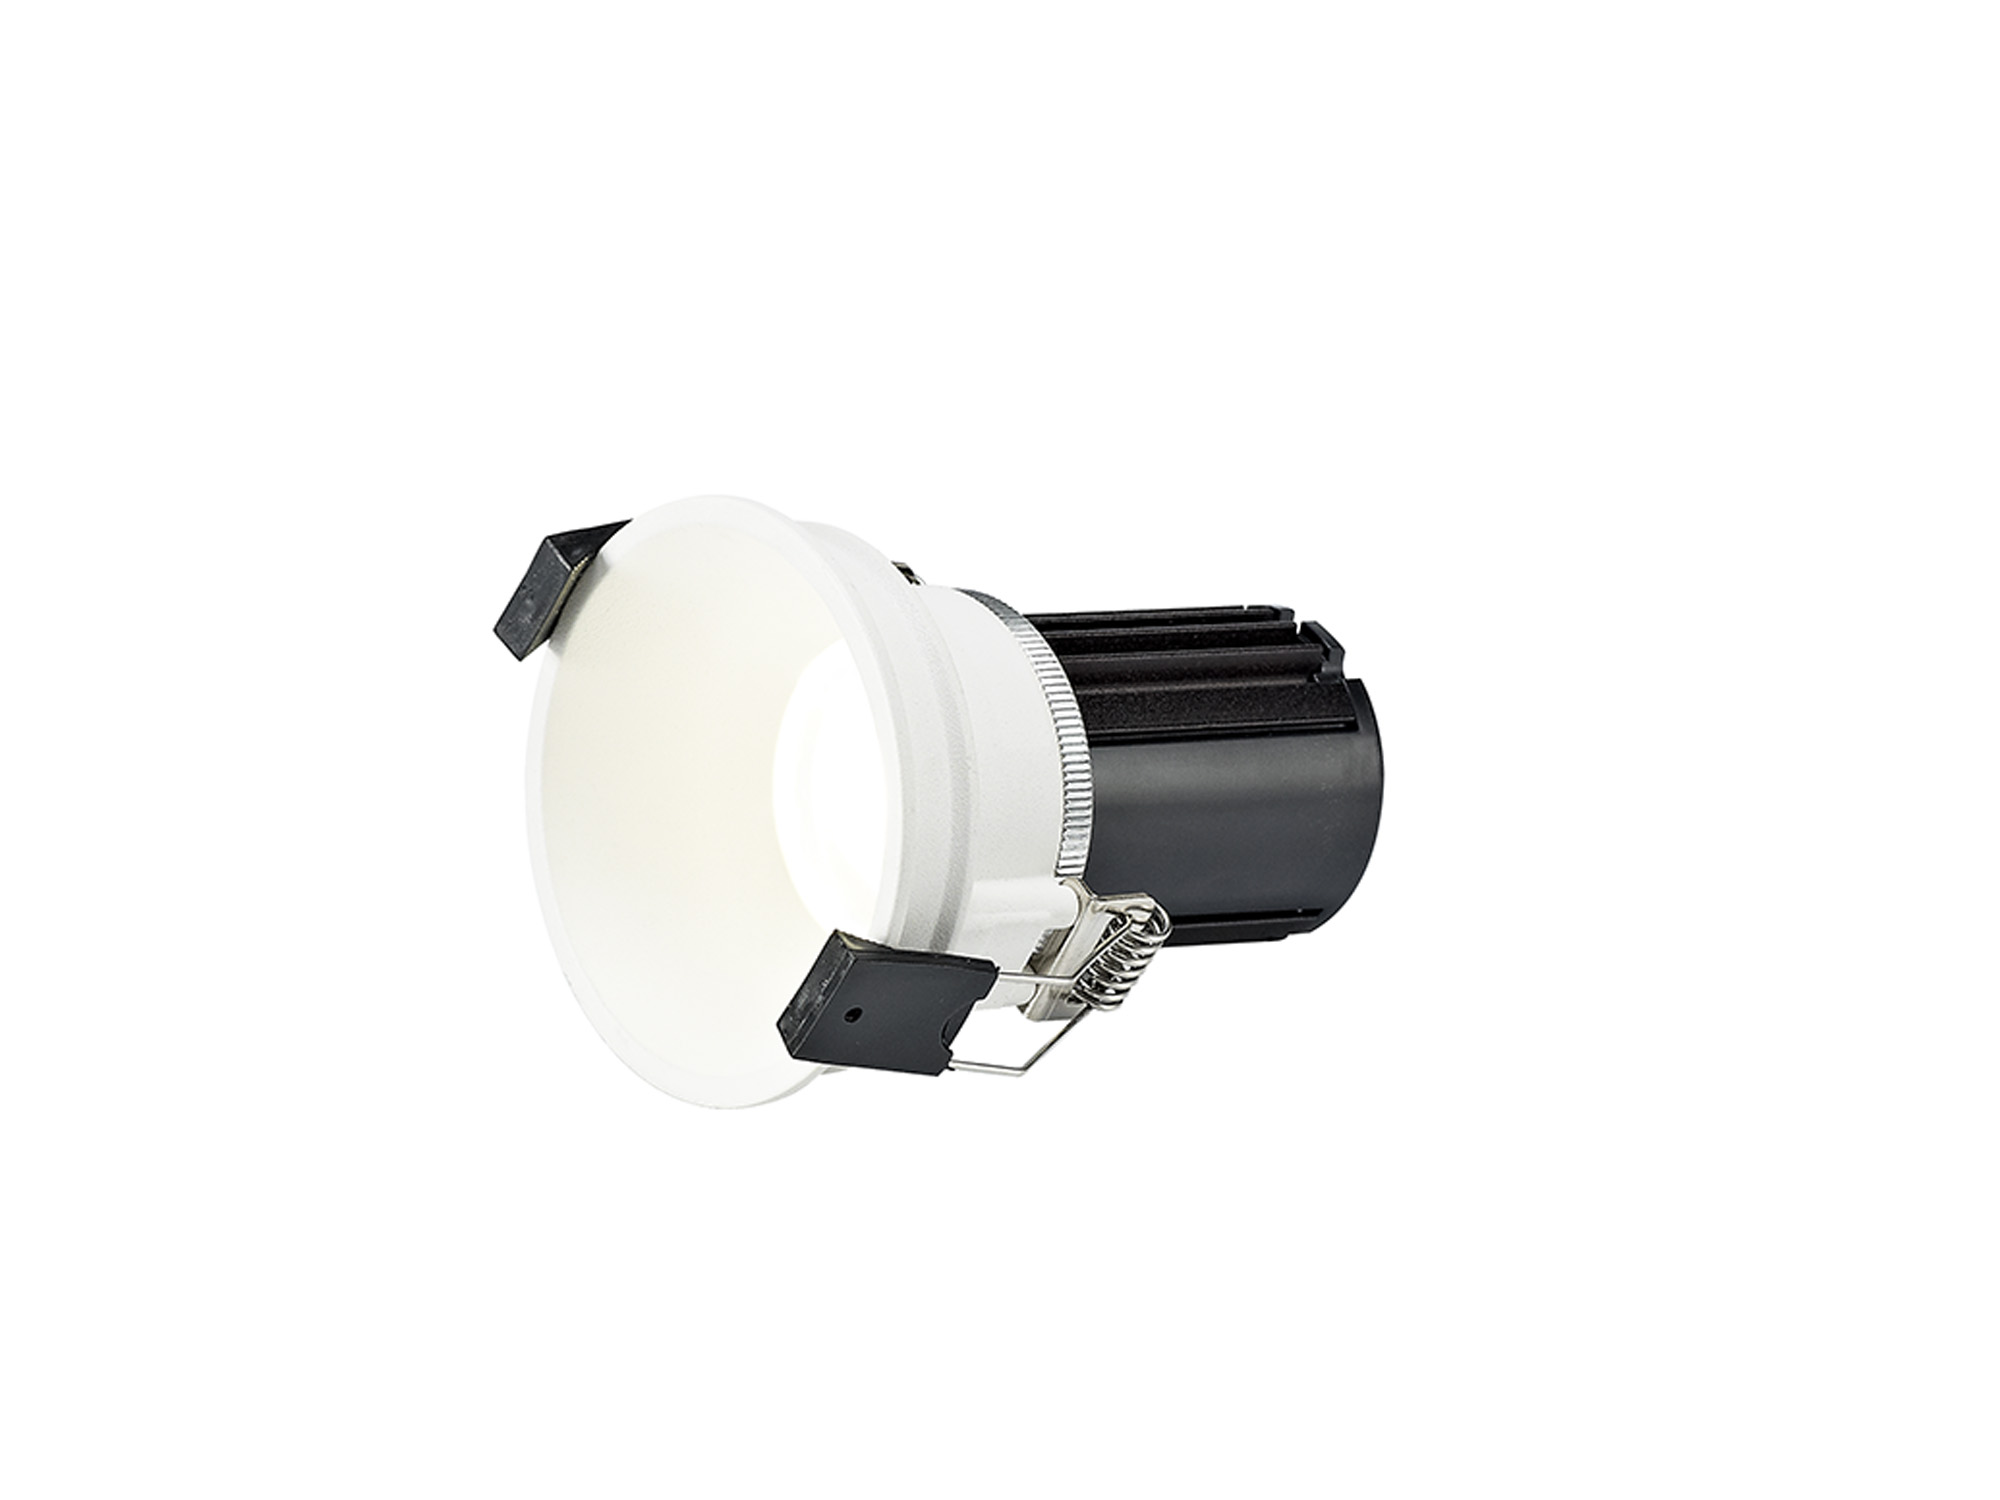 DM201614  Bania 12 Tridonic Powered 12W 4000K 1200lm 36° ; 300mA CRI>90 LED Engine White Fixed Recessed Spotlight; Cut Out: 76mm; IP20; 5yrs Warranty